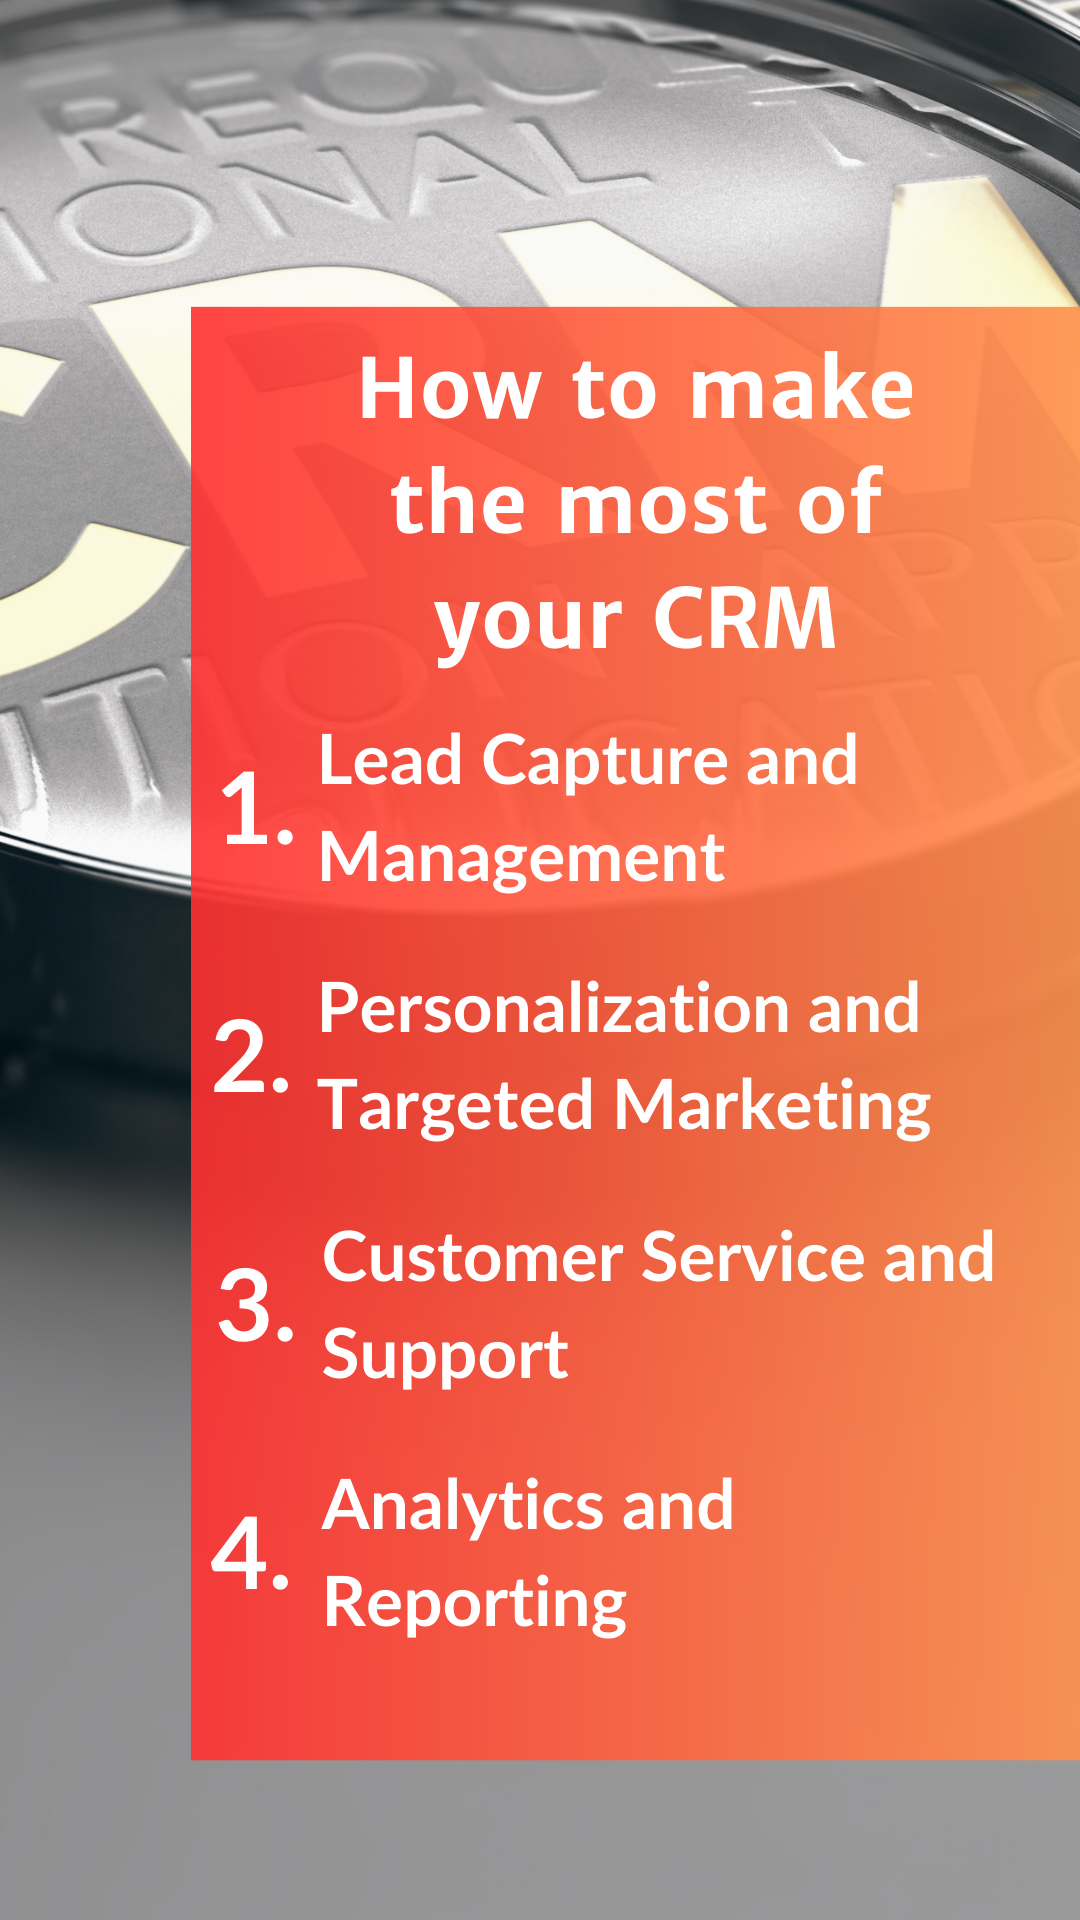 How to make the most of your CRM